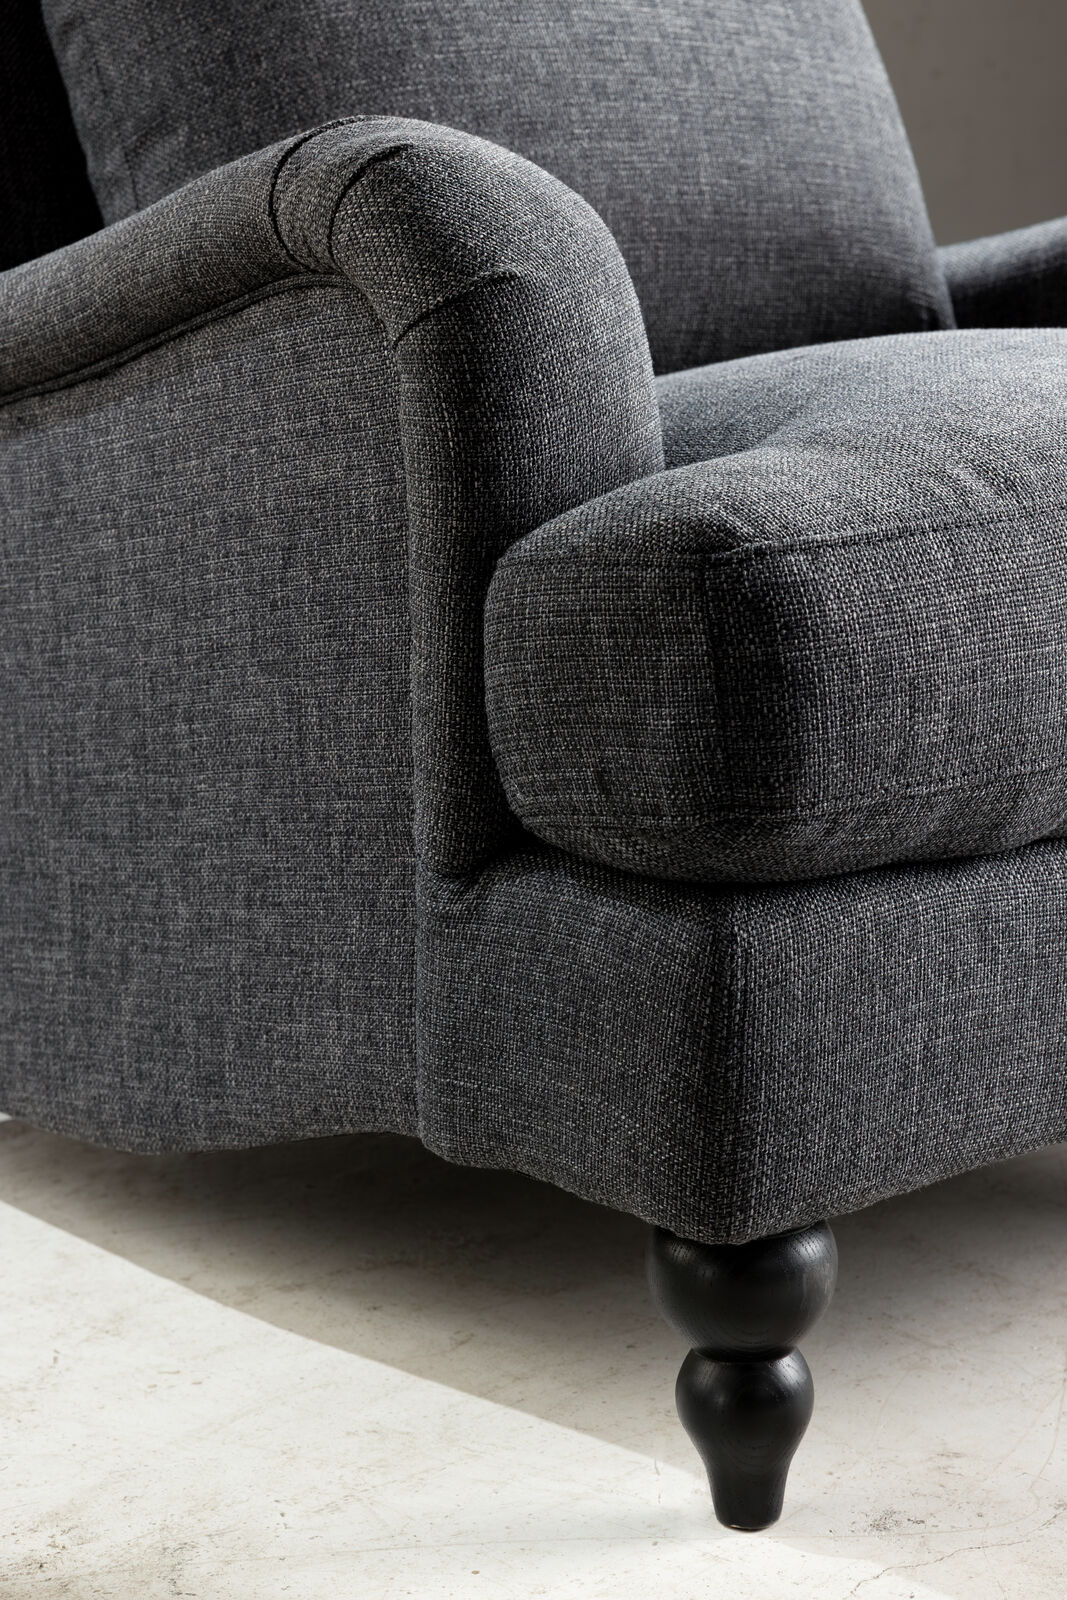 Block & Chisel grey upholstered armchair